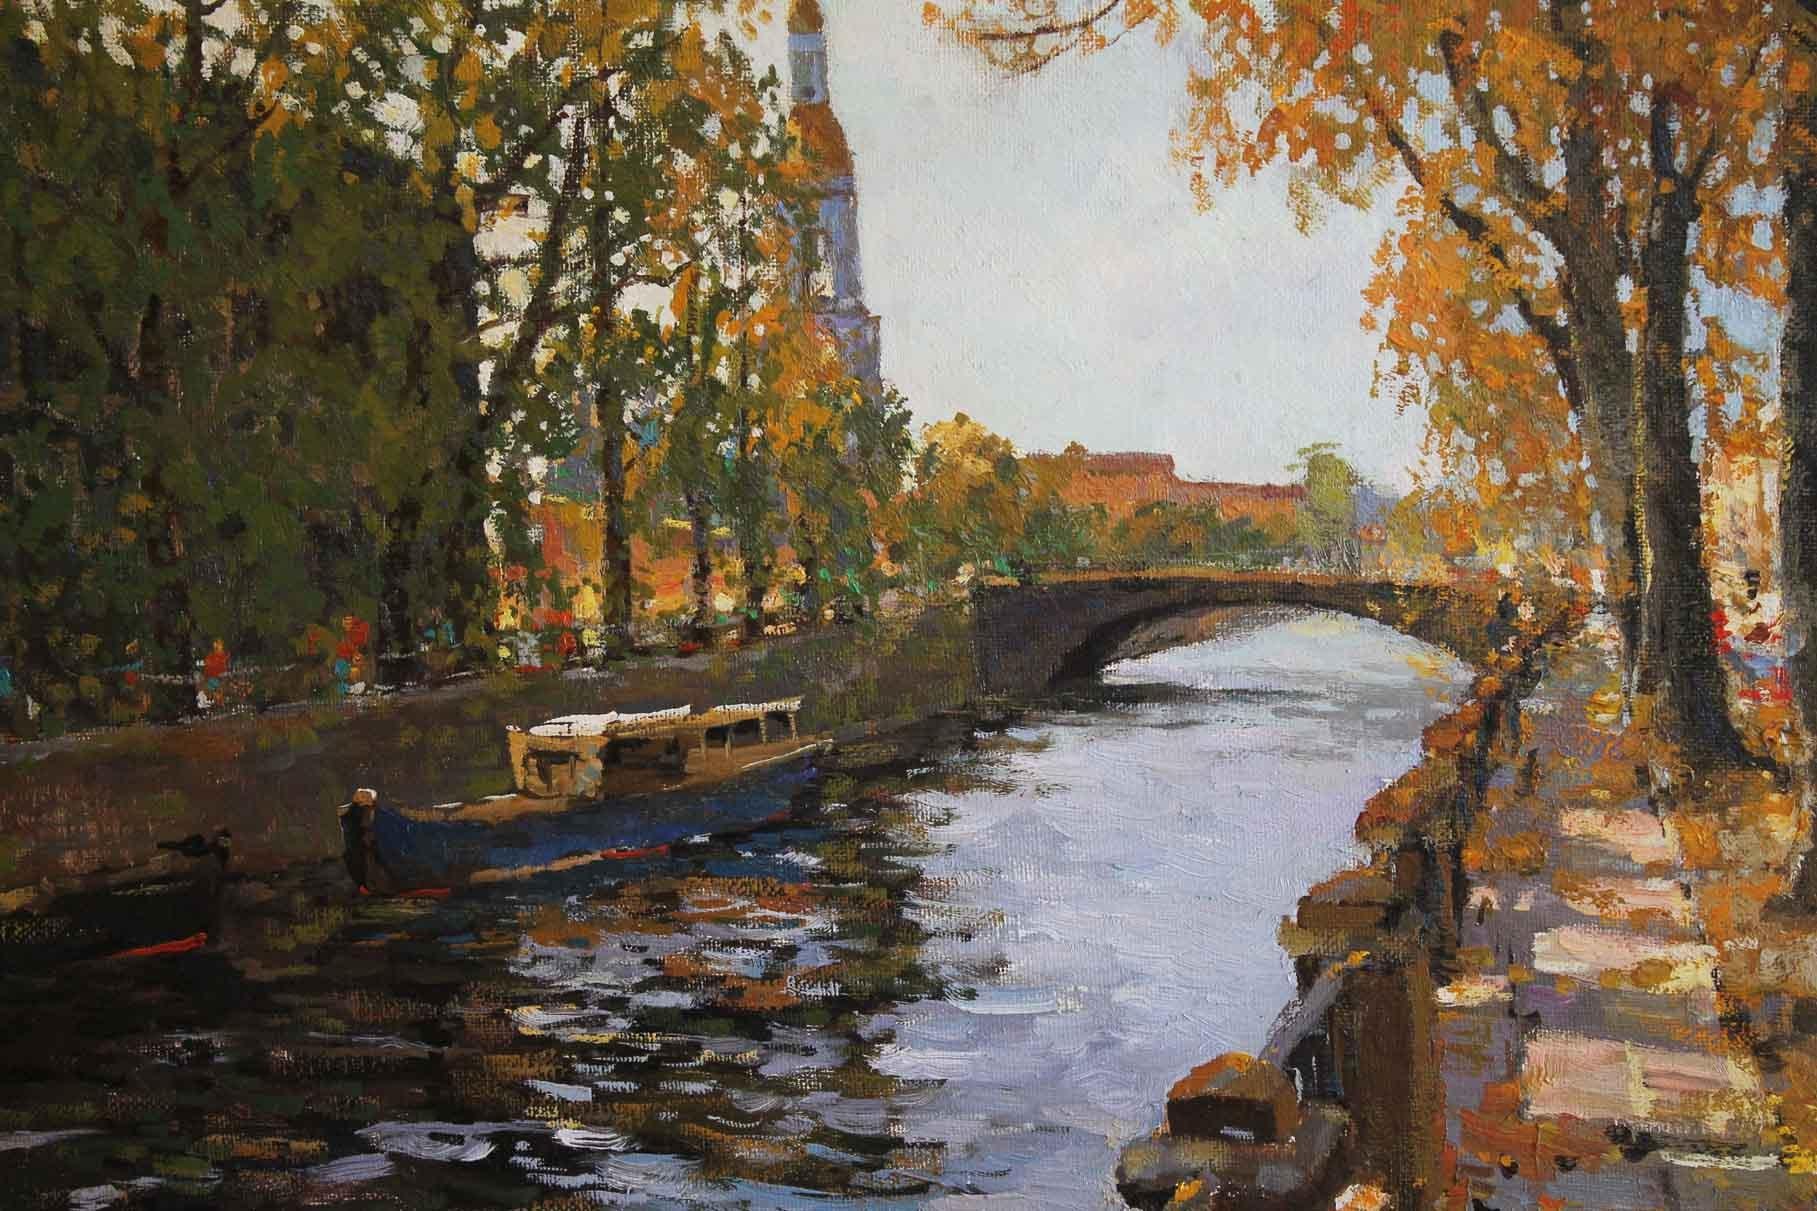 Griboedov Canal - Impressionist Painting by Alexander Kremer